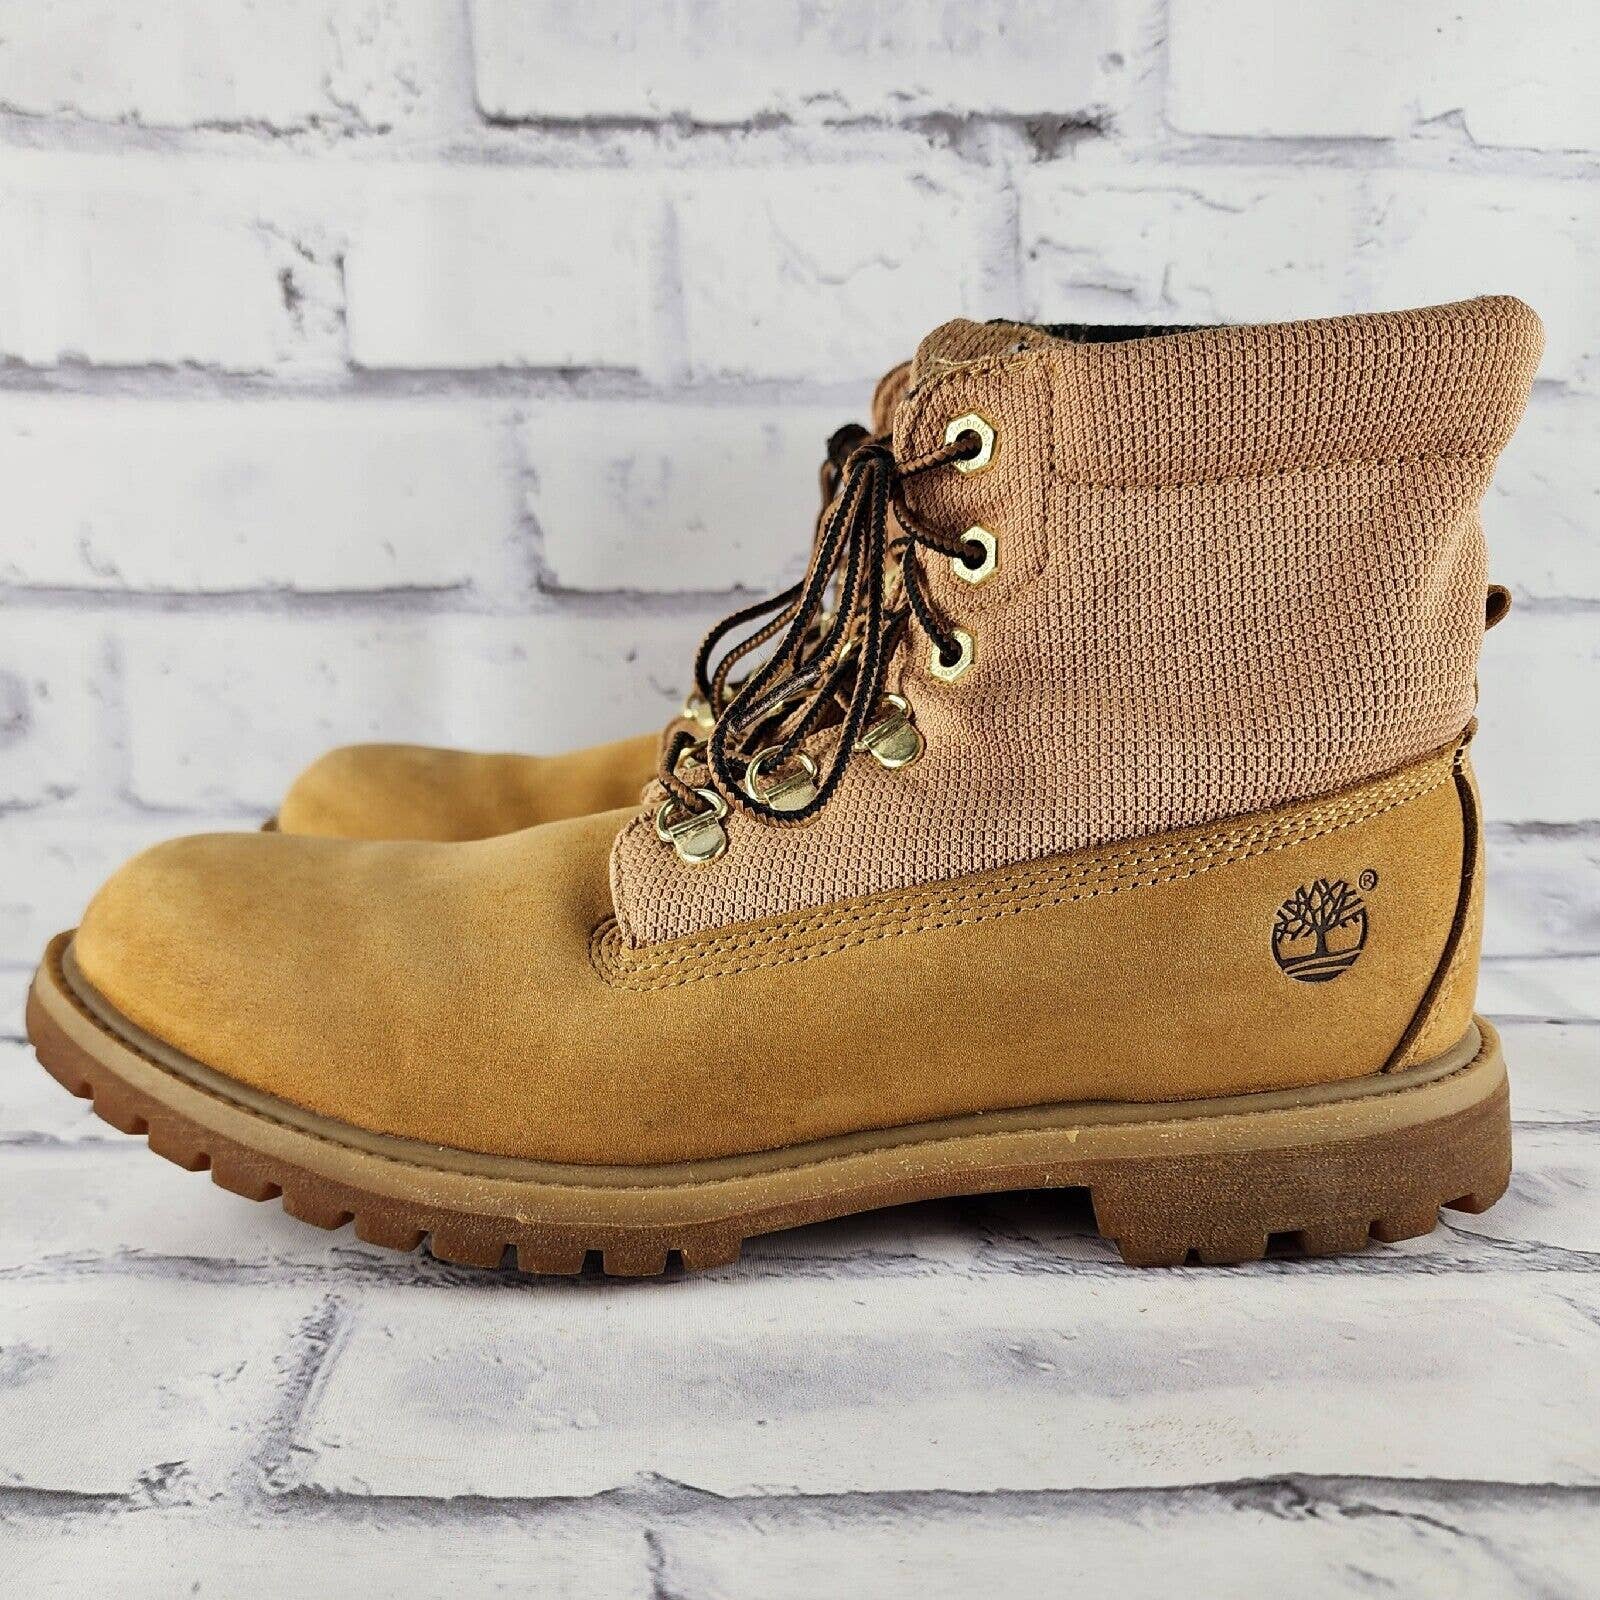 Timberland Roll Top Boots Women's Size 10 M Tan Leather With Paid Lining